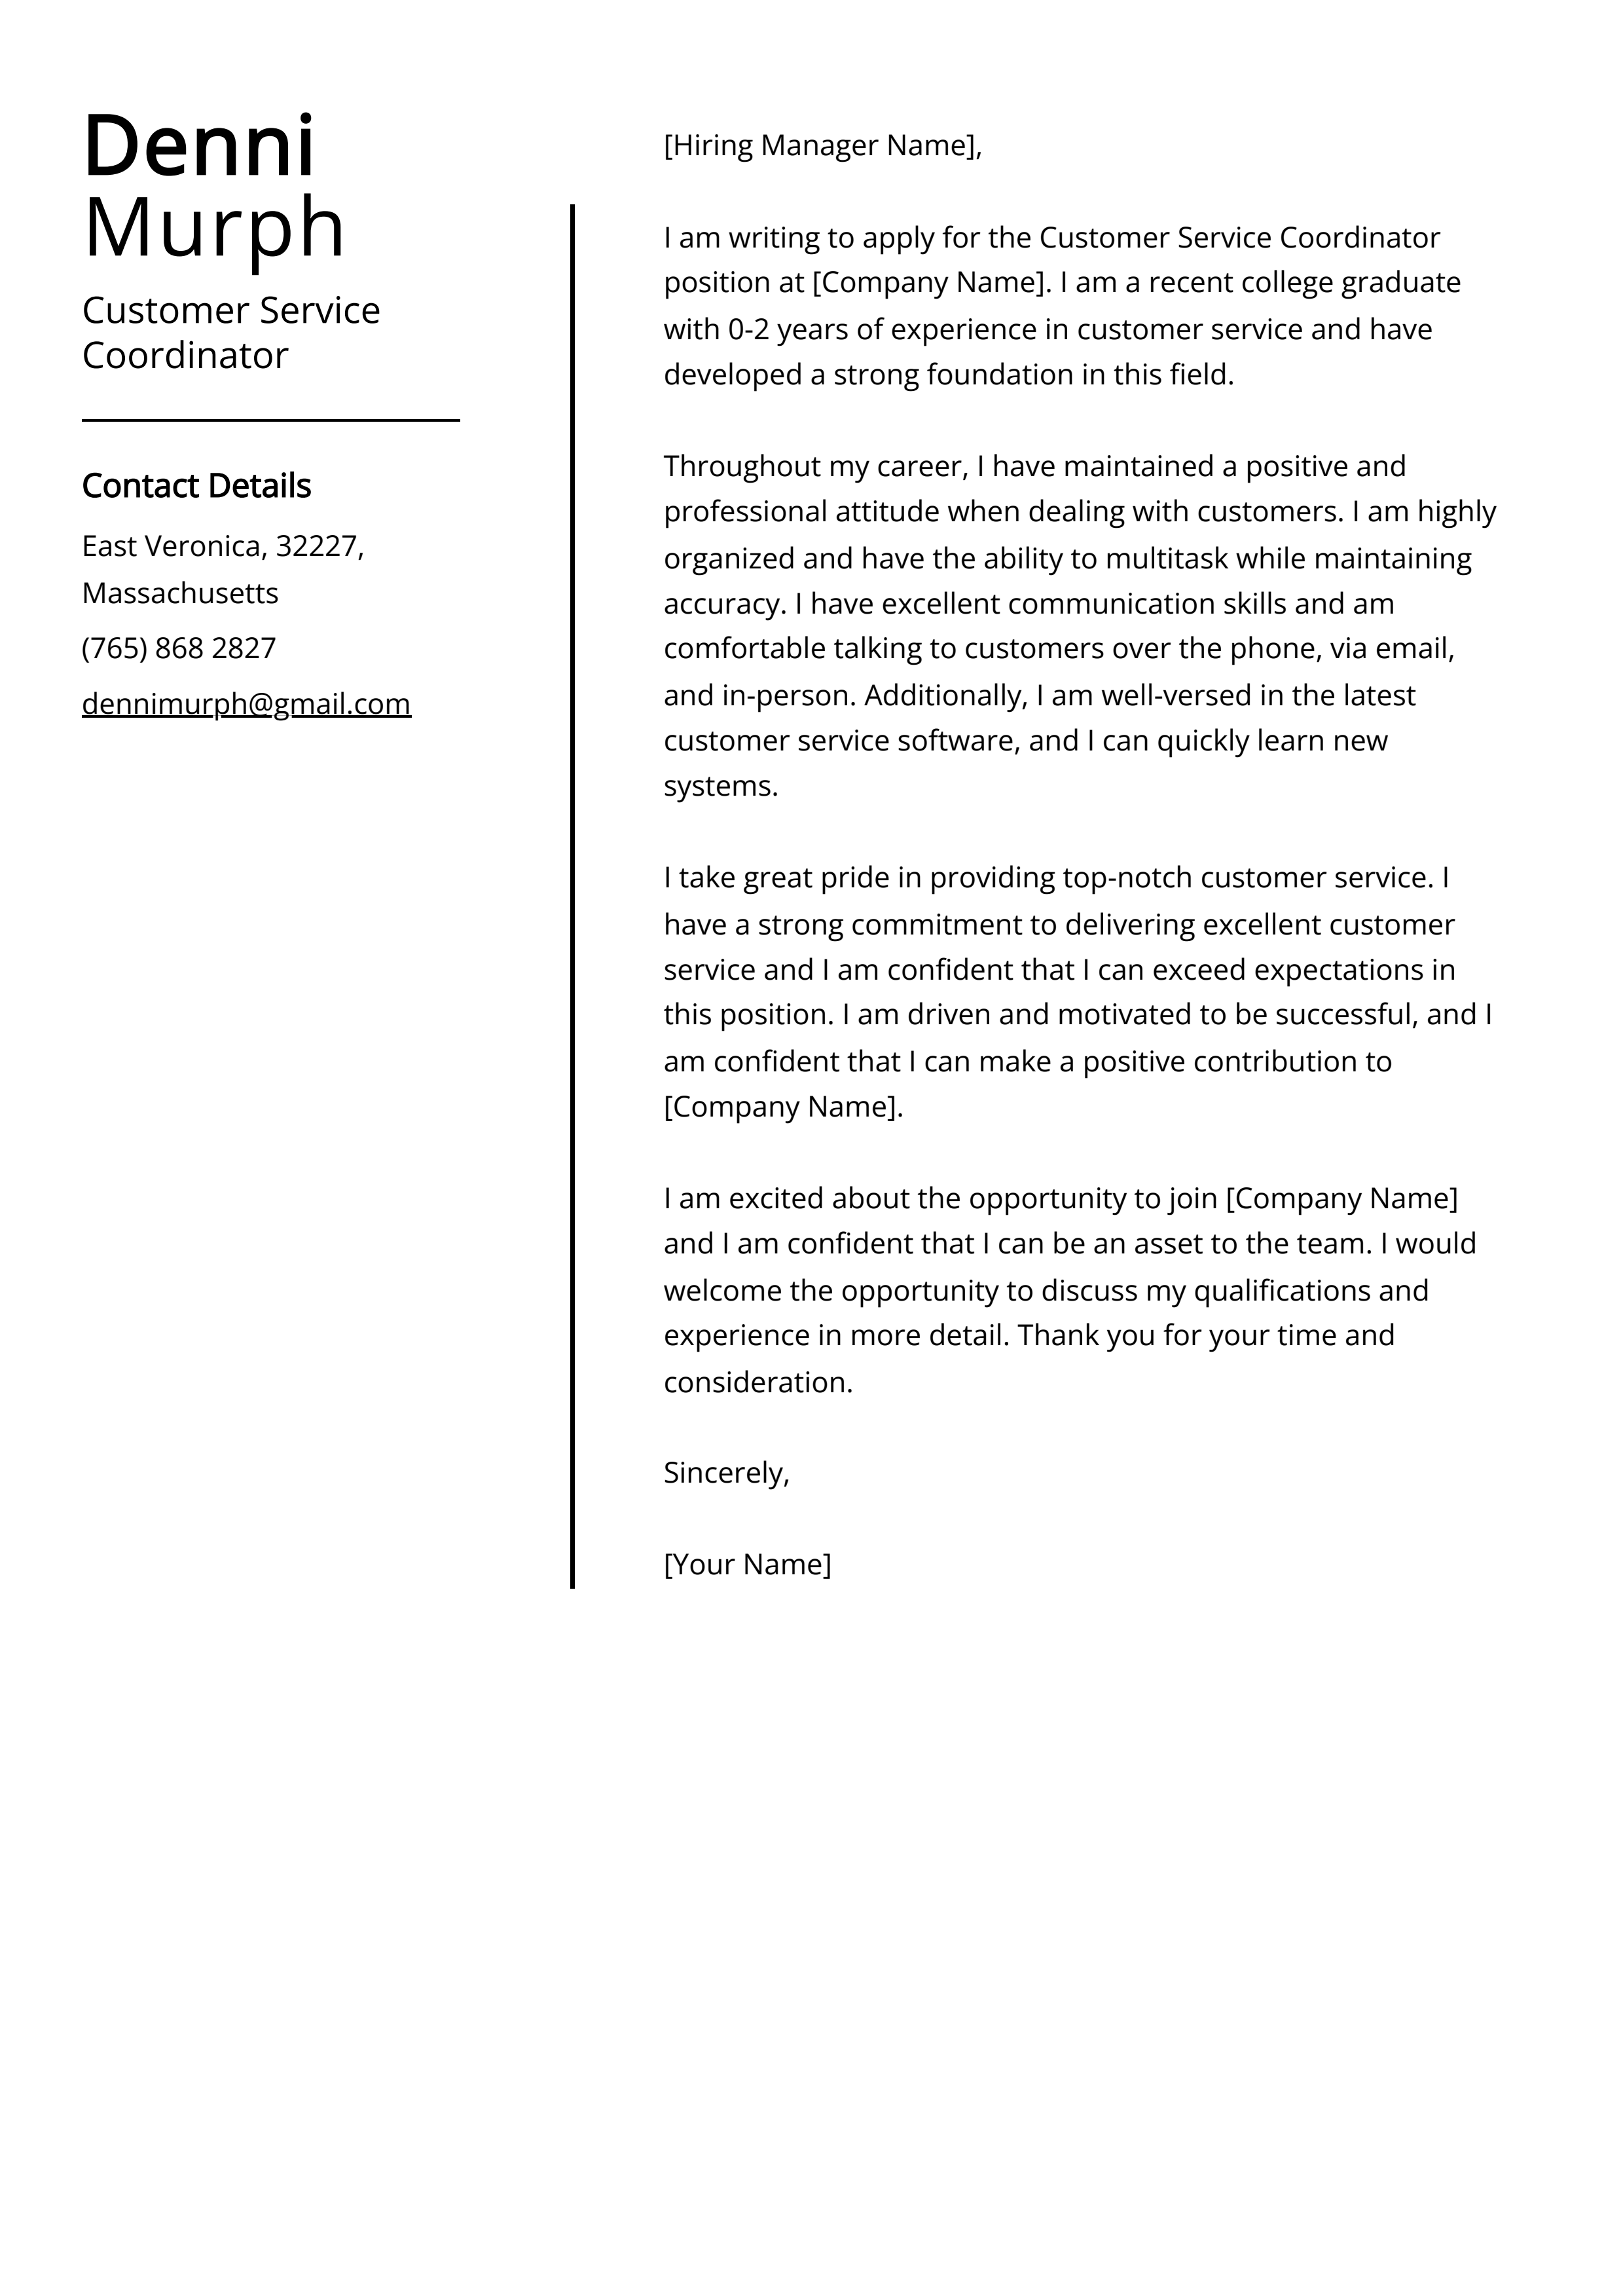 Customer Service Coordinator Cover Letter Example